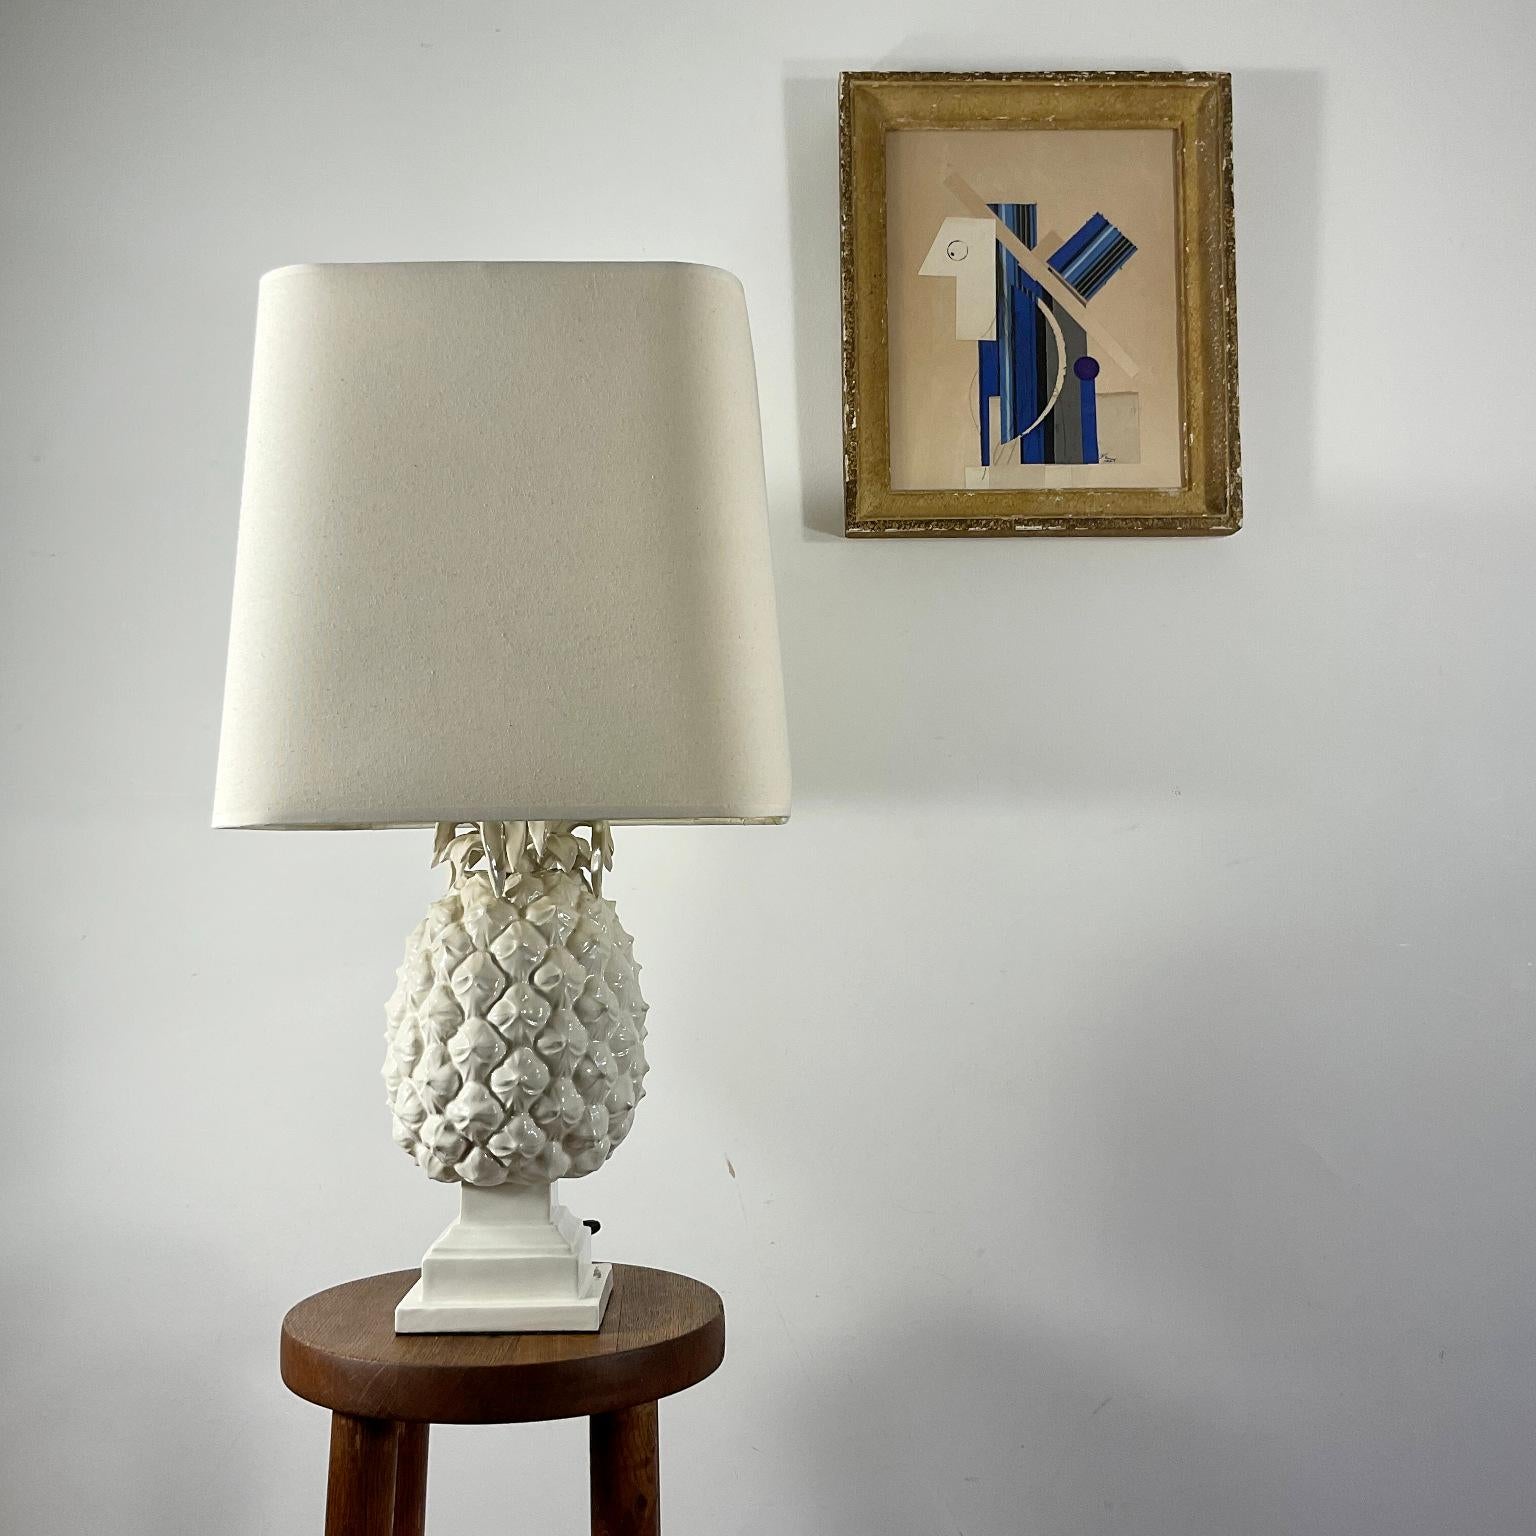 Mid-Century Modern Pineapple Table Lamp in White Glazed Ceramic from Italy 1970s For Sale